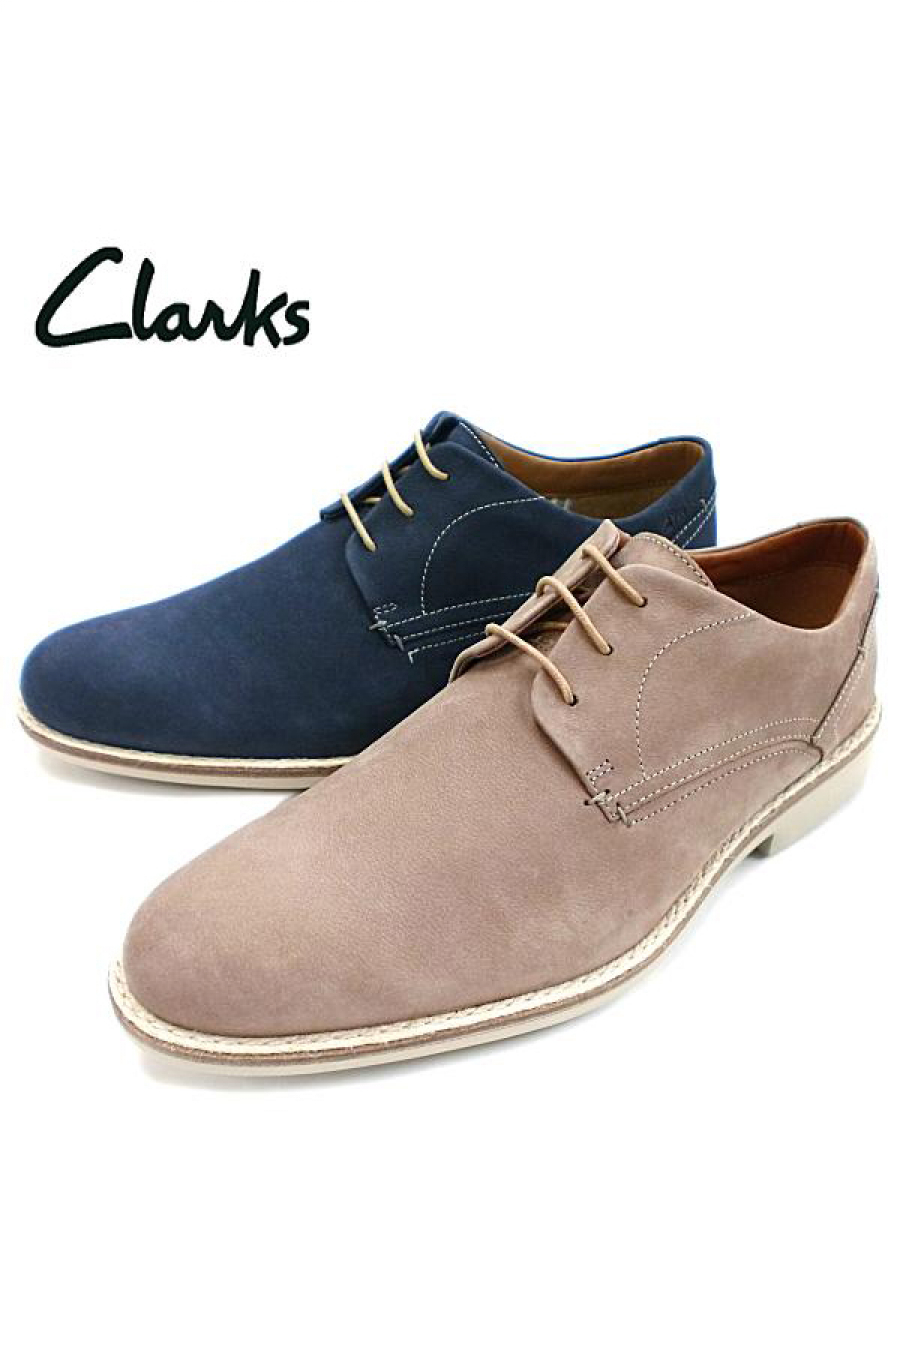 where can you buy clarks shoes